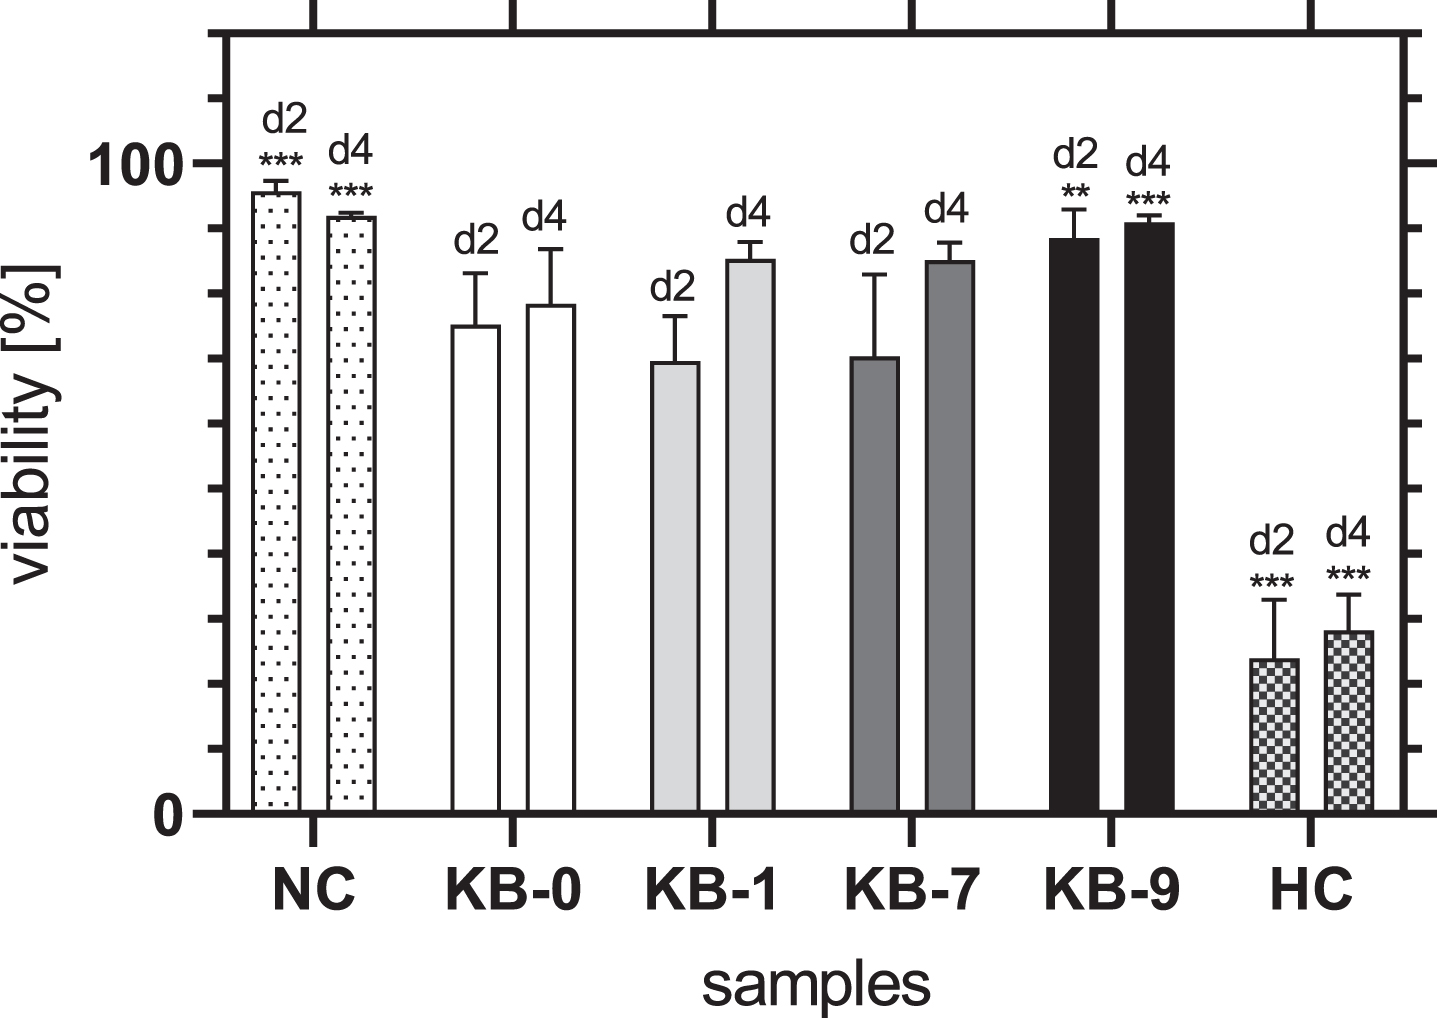 Viability of adherent CHO cells two and four days after cell seeding on TCP (NC), KB-0, KB-1, KB-7 and KB-9. Shown are arithmetic mean±standard deviation of n = 4 –6. Statistical significance was analyzed using t-test analysis. p < 0.05 was considered significant compared to KB-0 *: p < 0.05, **: p < 0.01, ***: p < 0.001.